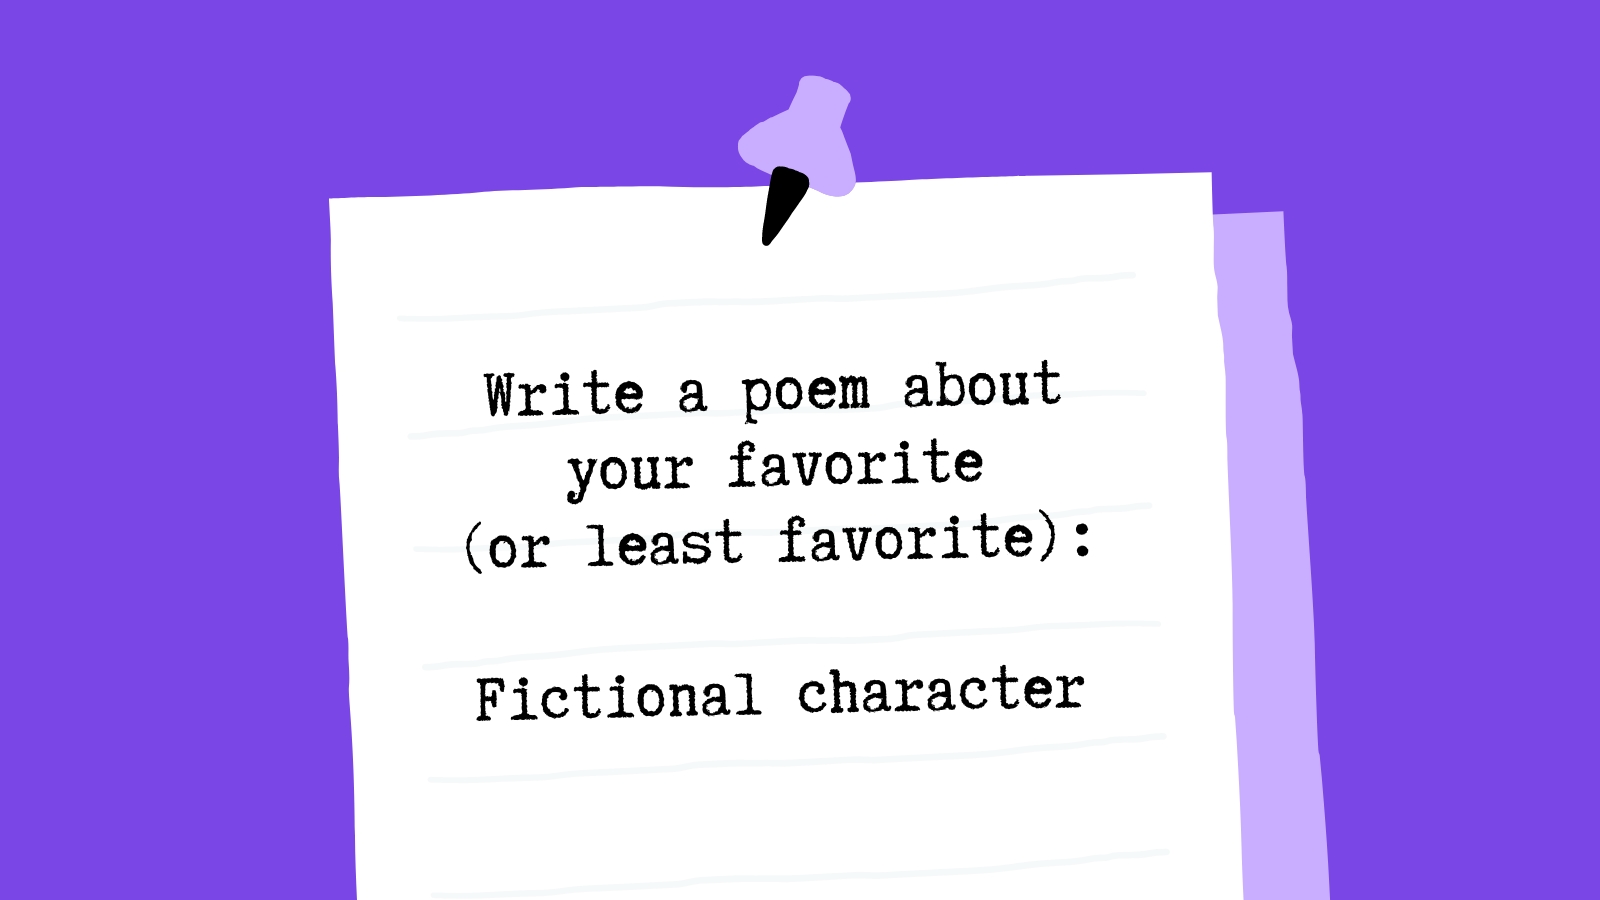 Write a poem about your favorite (or least favorite): Fictional character.